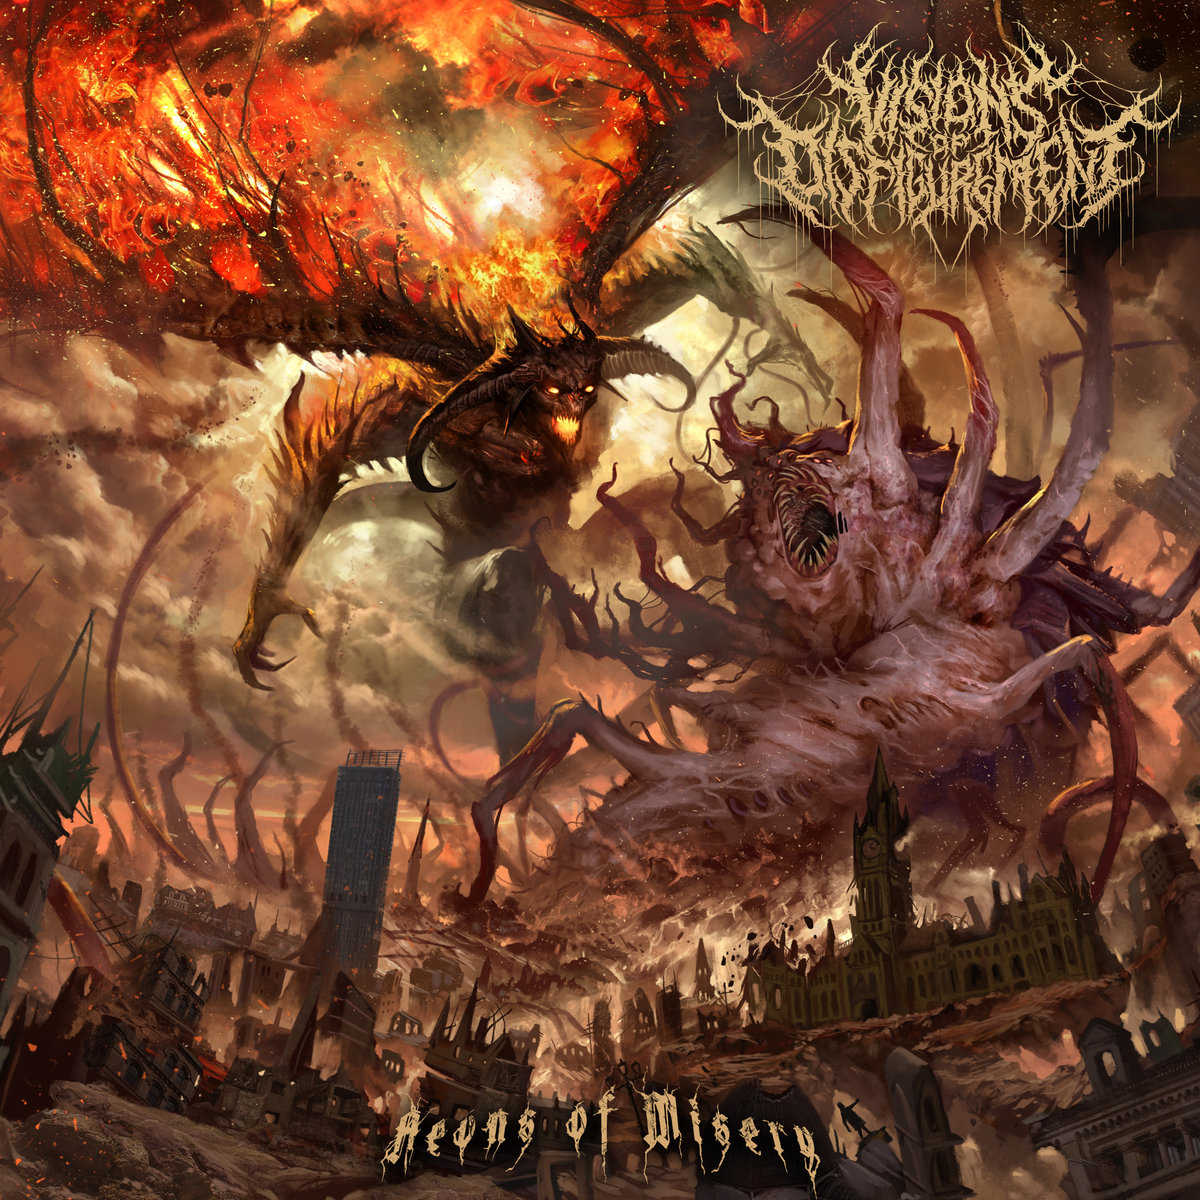 VISIONS-OF-DISFIGUREMENT-Aeons-of-Misery-Cover.jpg